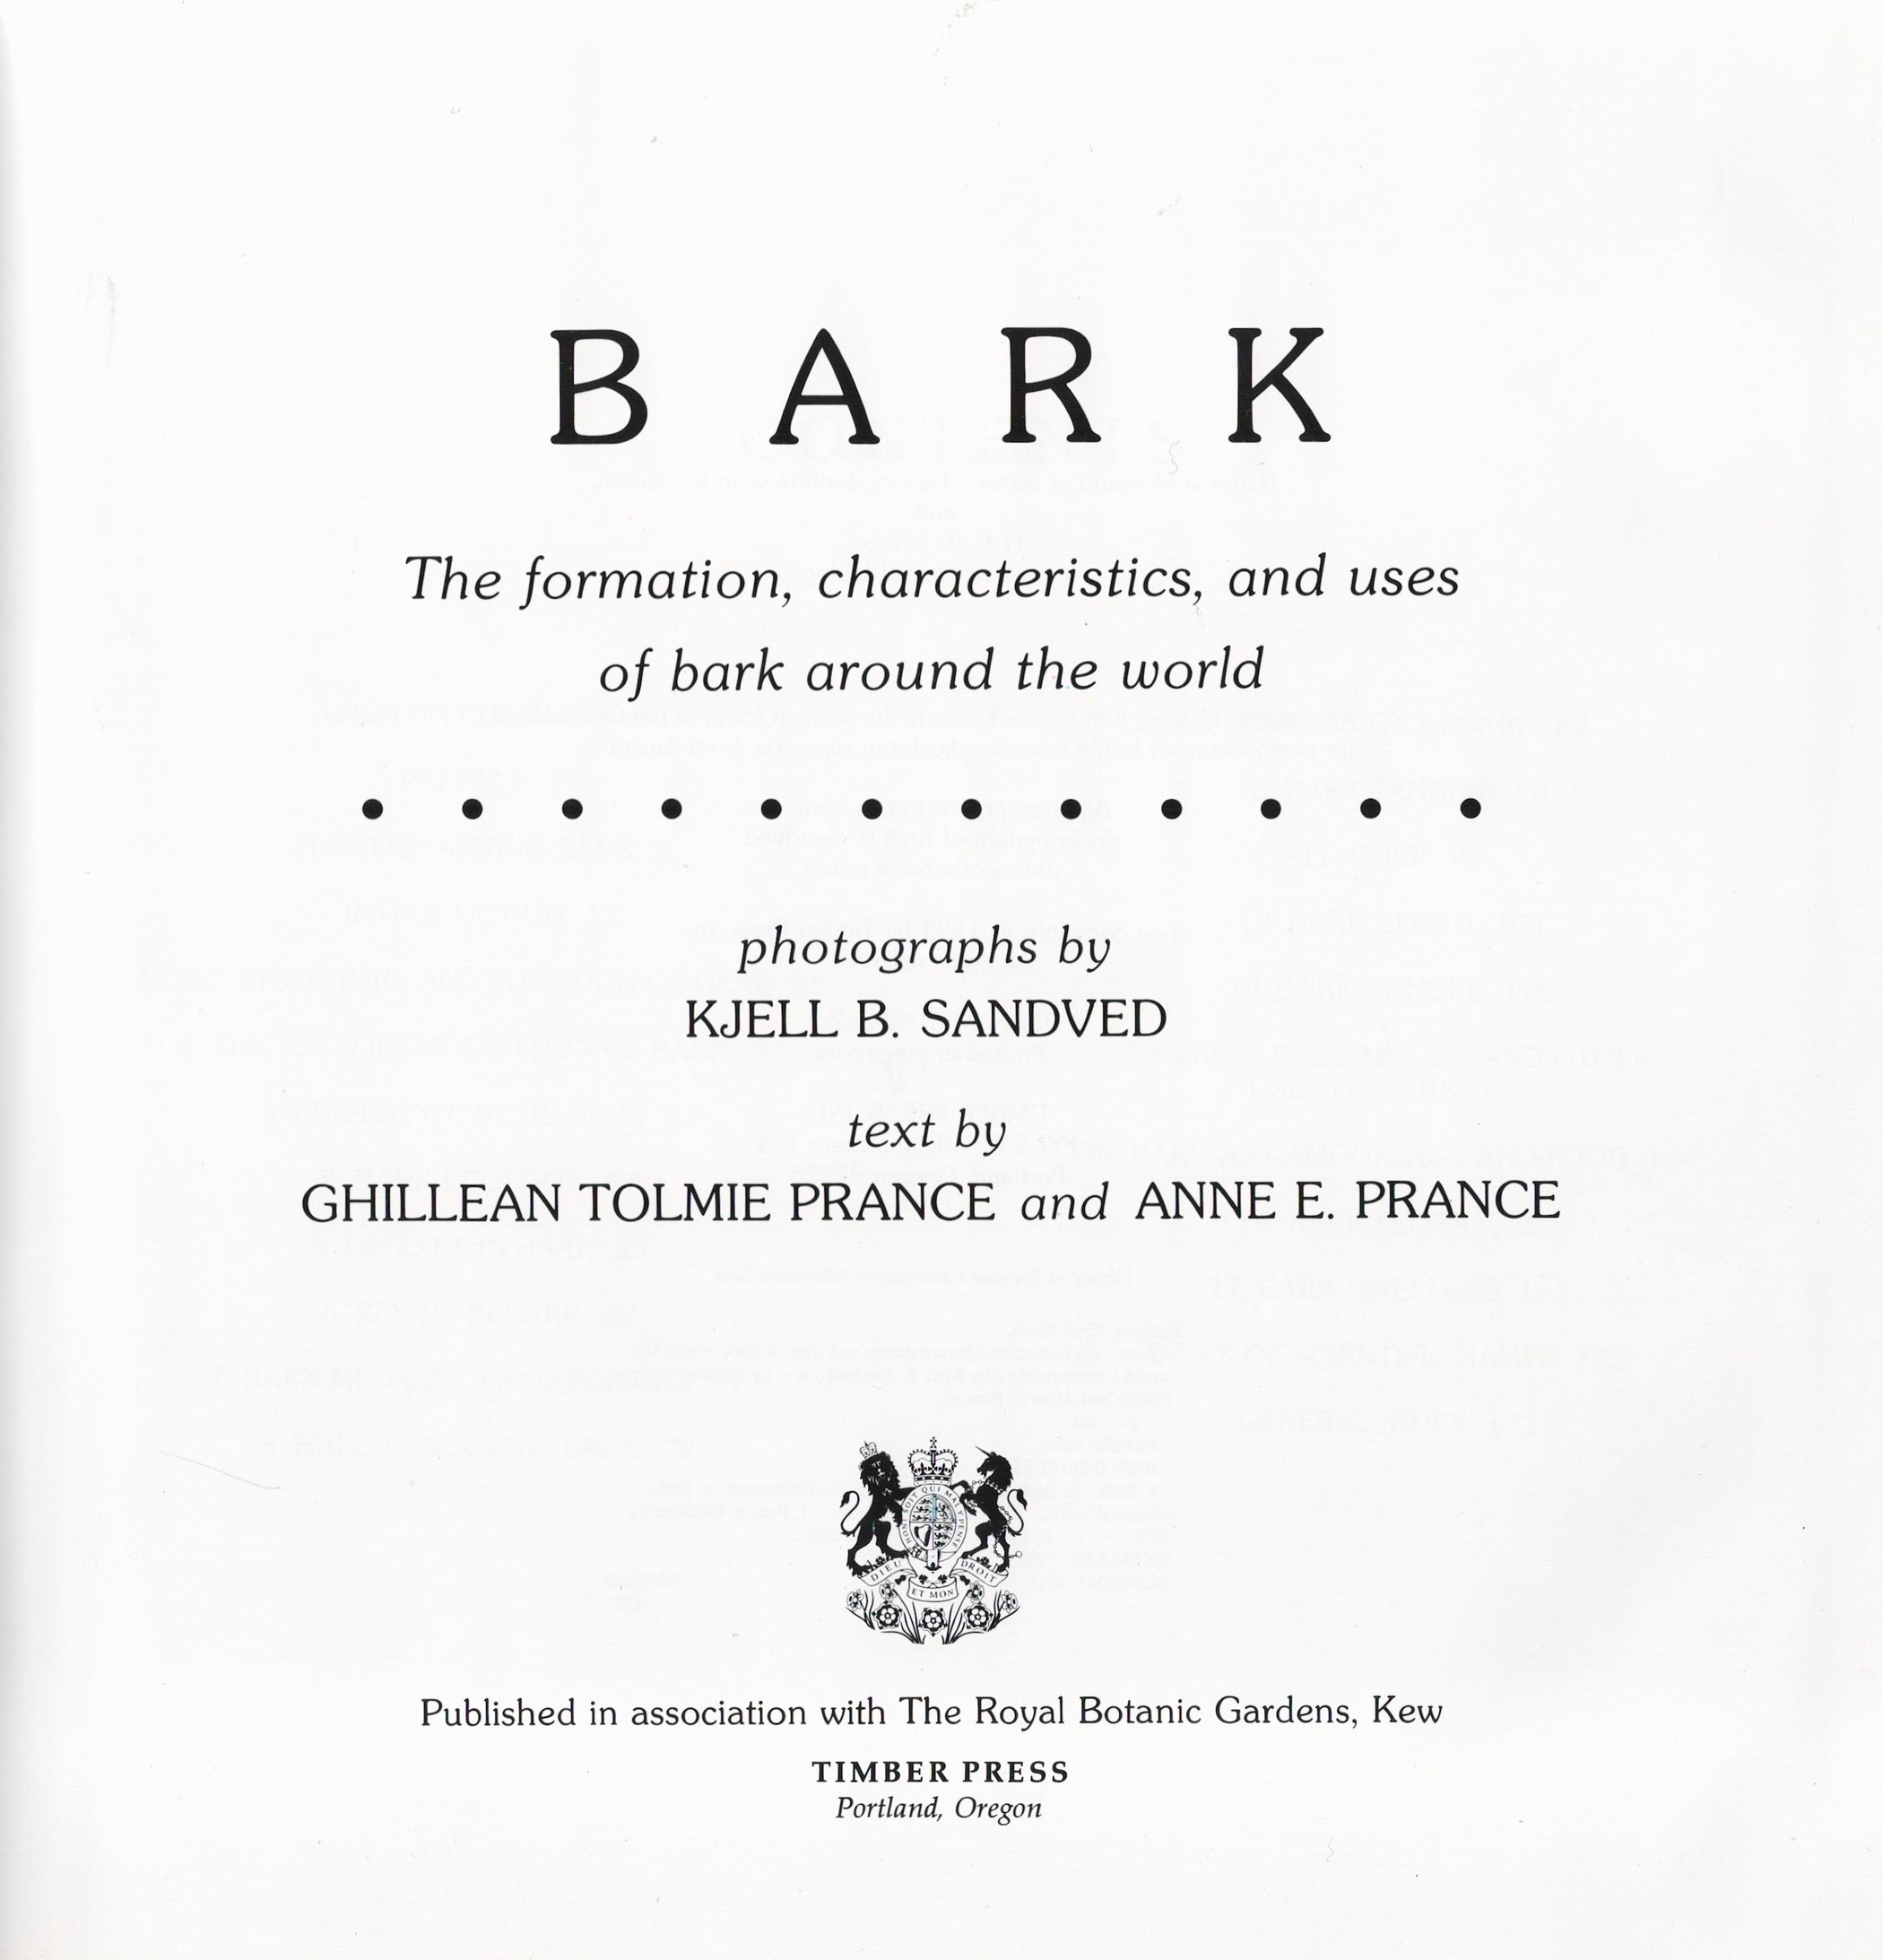 Bark The Formation, Characteristics, and uses of Bark Around the World by G T and A E Prance - Image 2 of 3